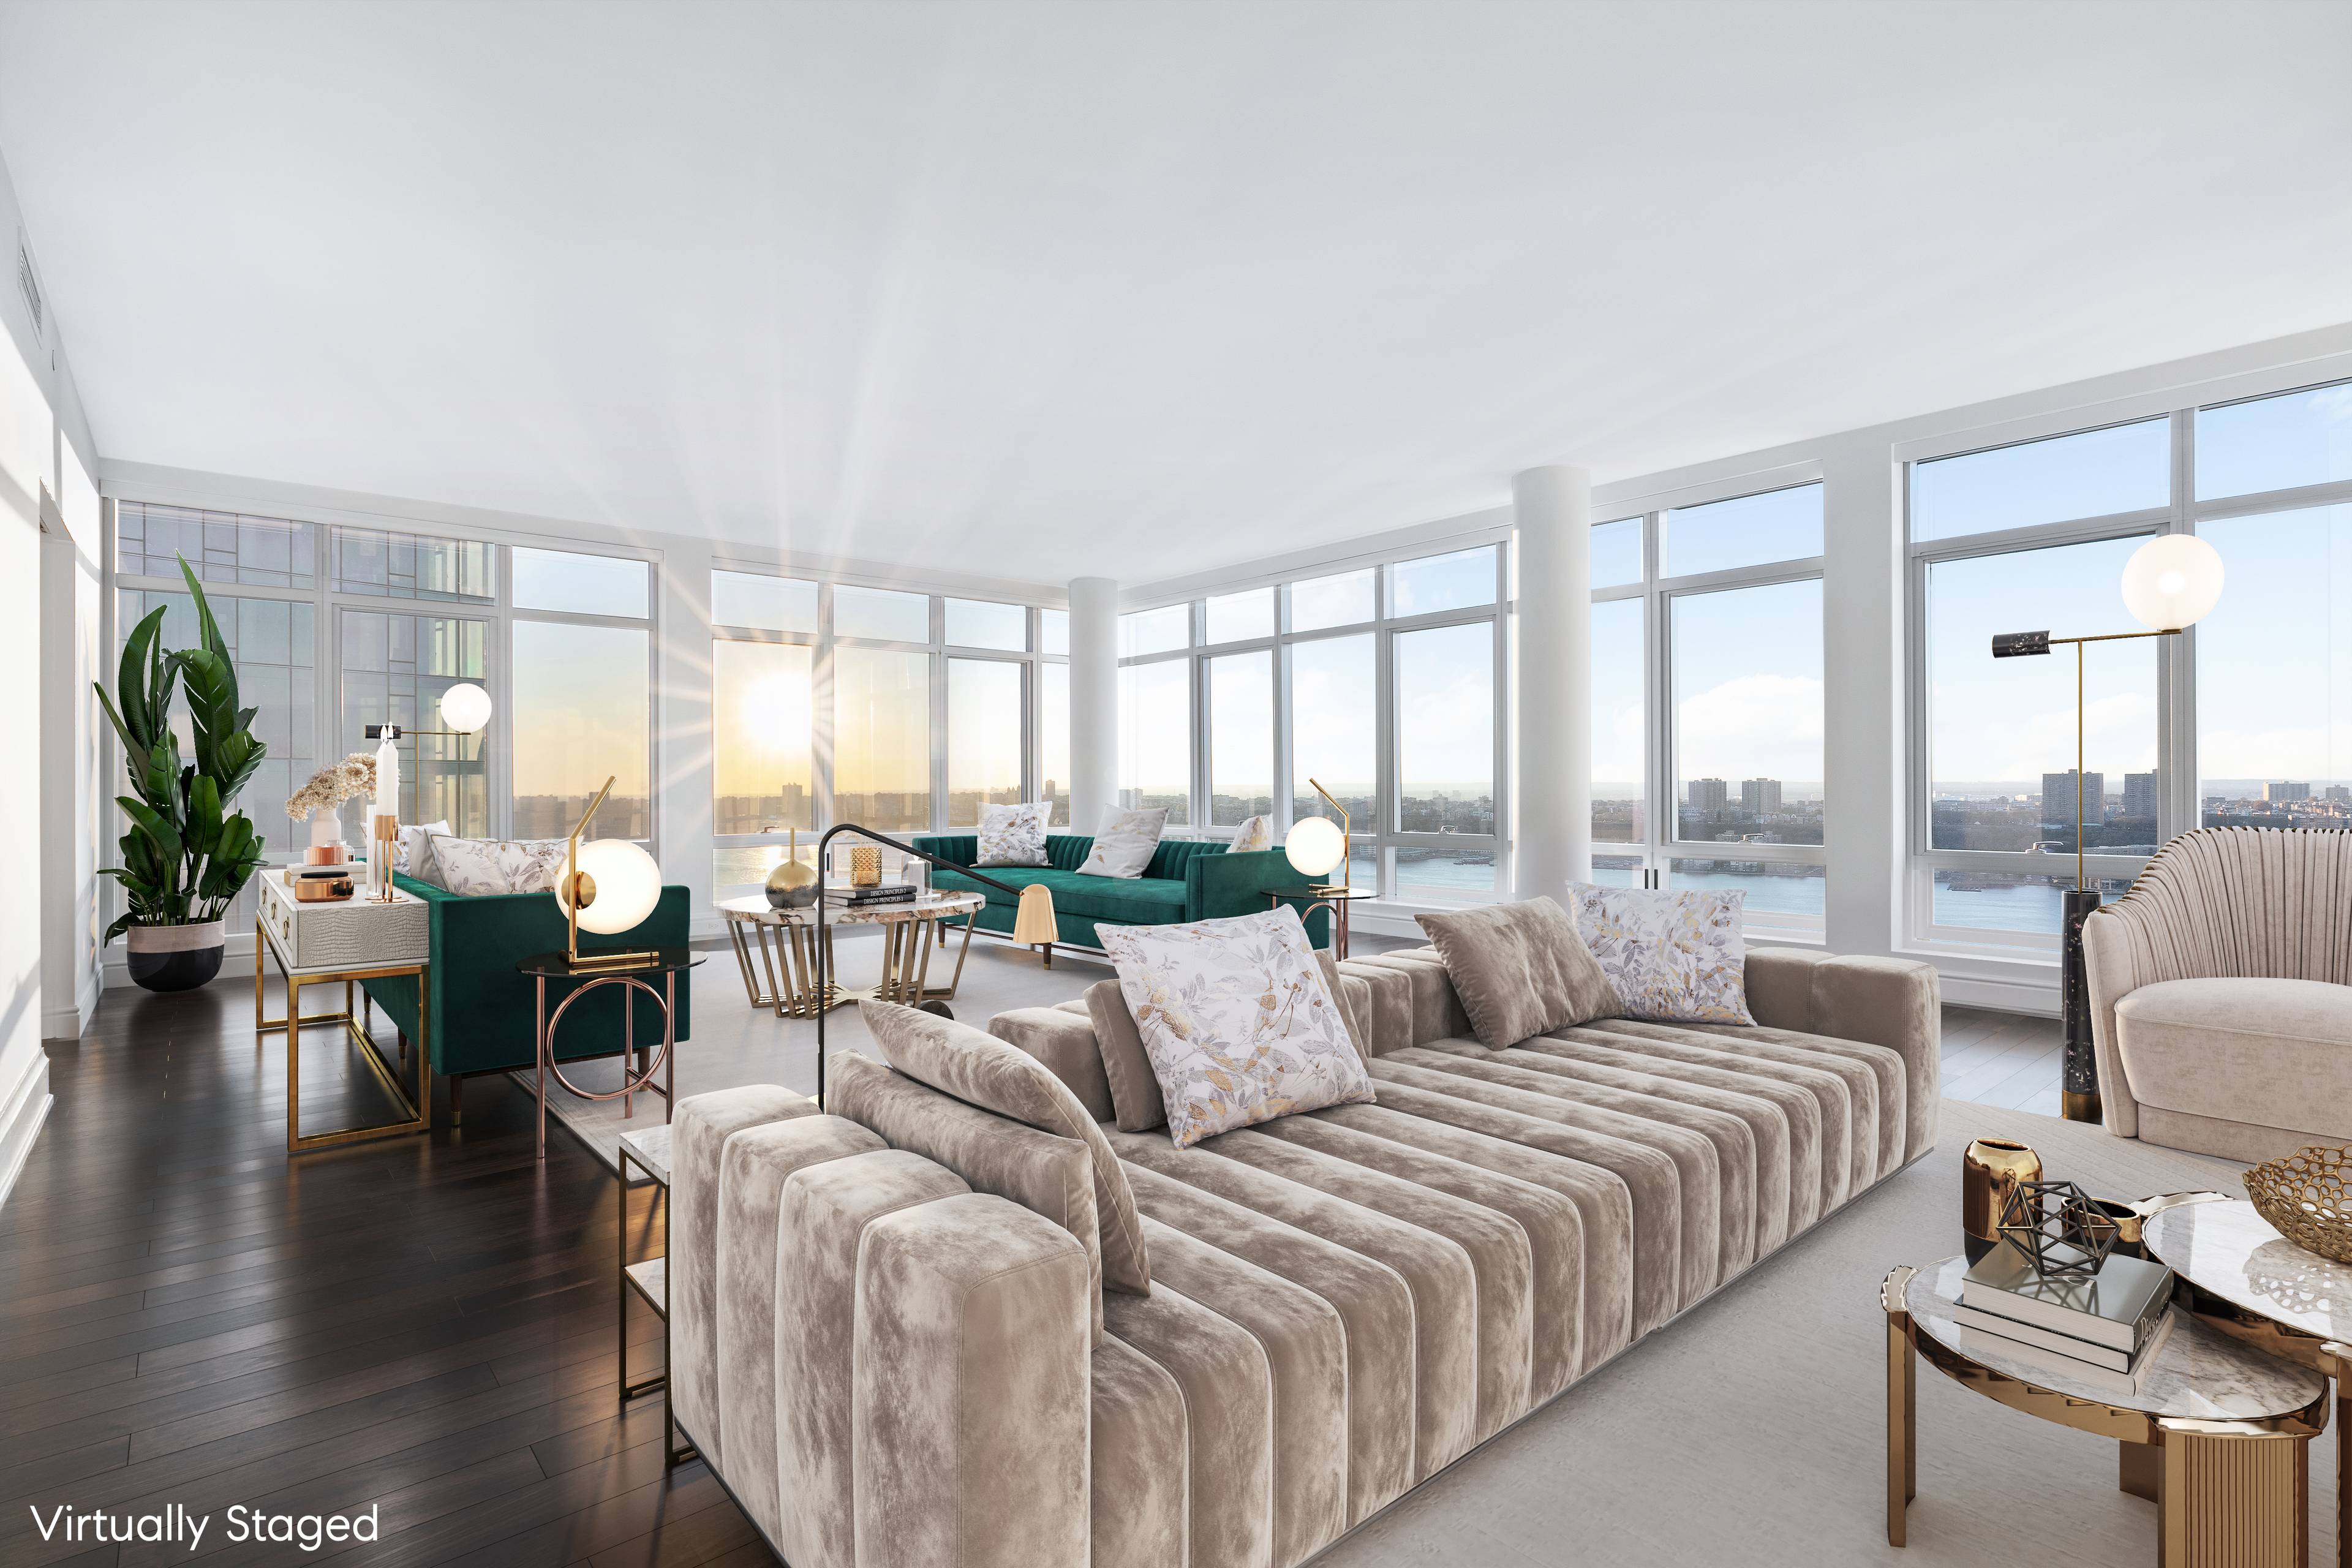 A once in a generation chance to own a Full Floor Residence with 100 linear feet of frontage soaring above the Hudson River !